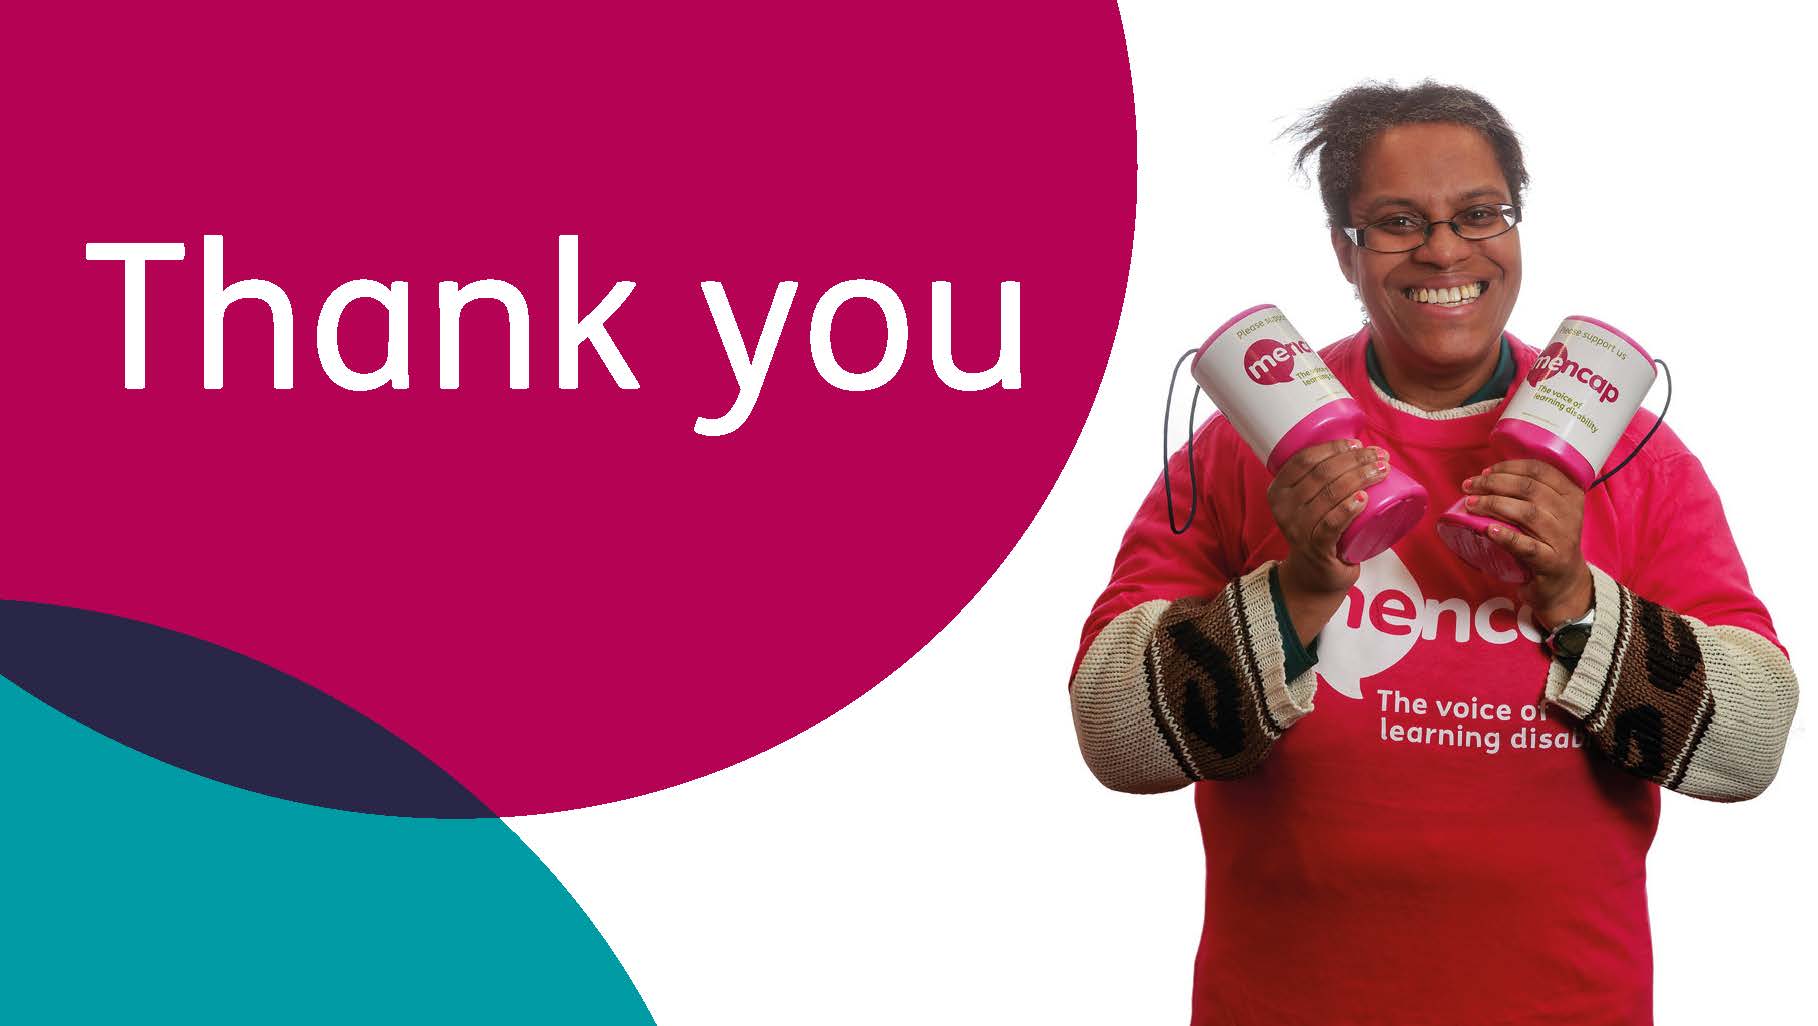 Woman wearing a Mencap t-shirt holding Mencap collection tins, next to text that reads "thank you".